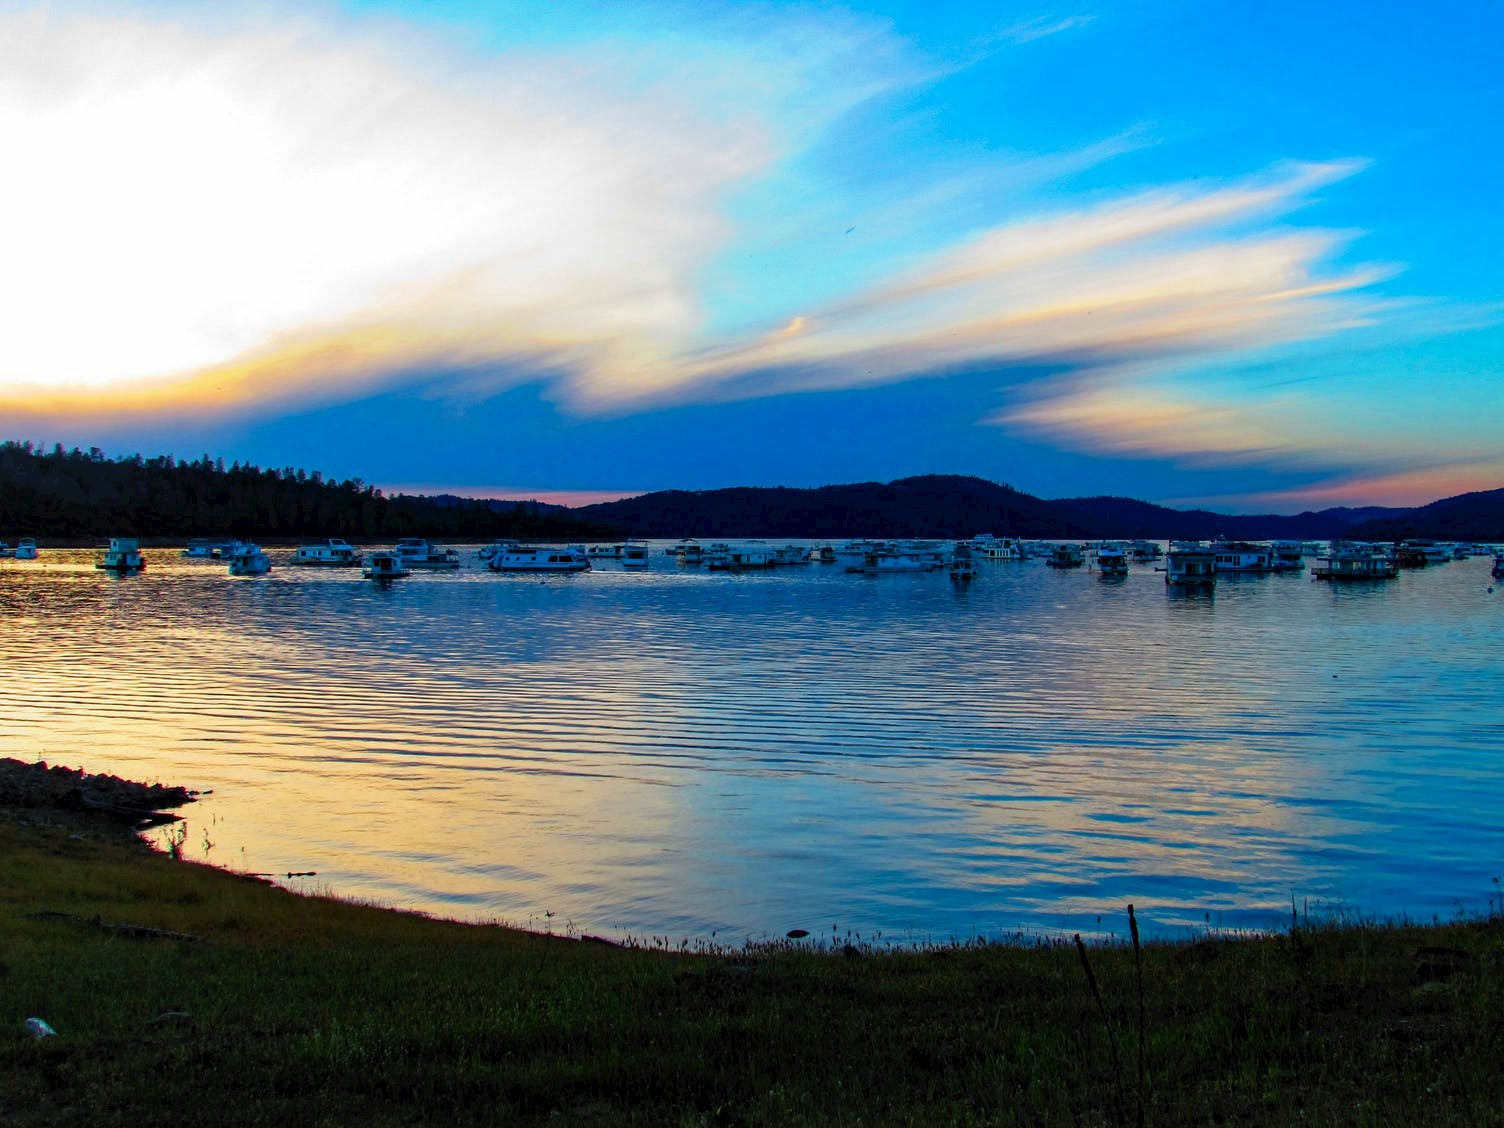 Sunset and colorful clouds over a lake where boats are anchored.